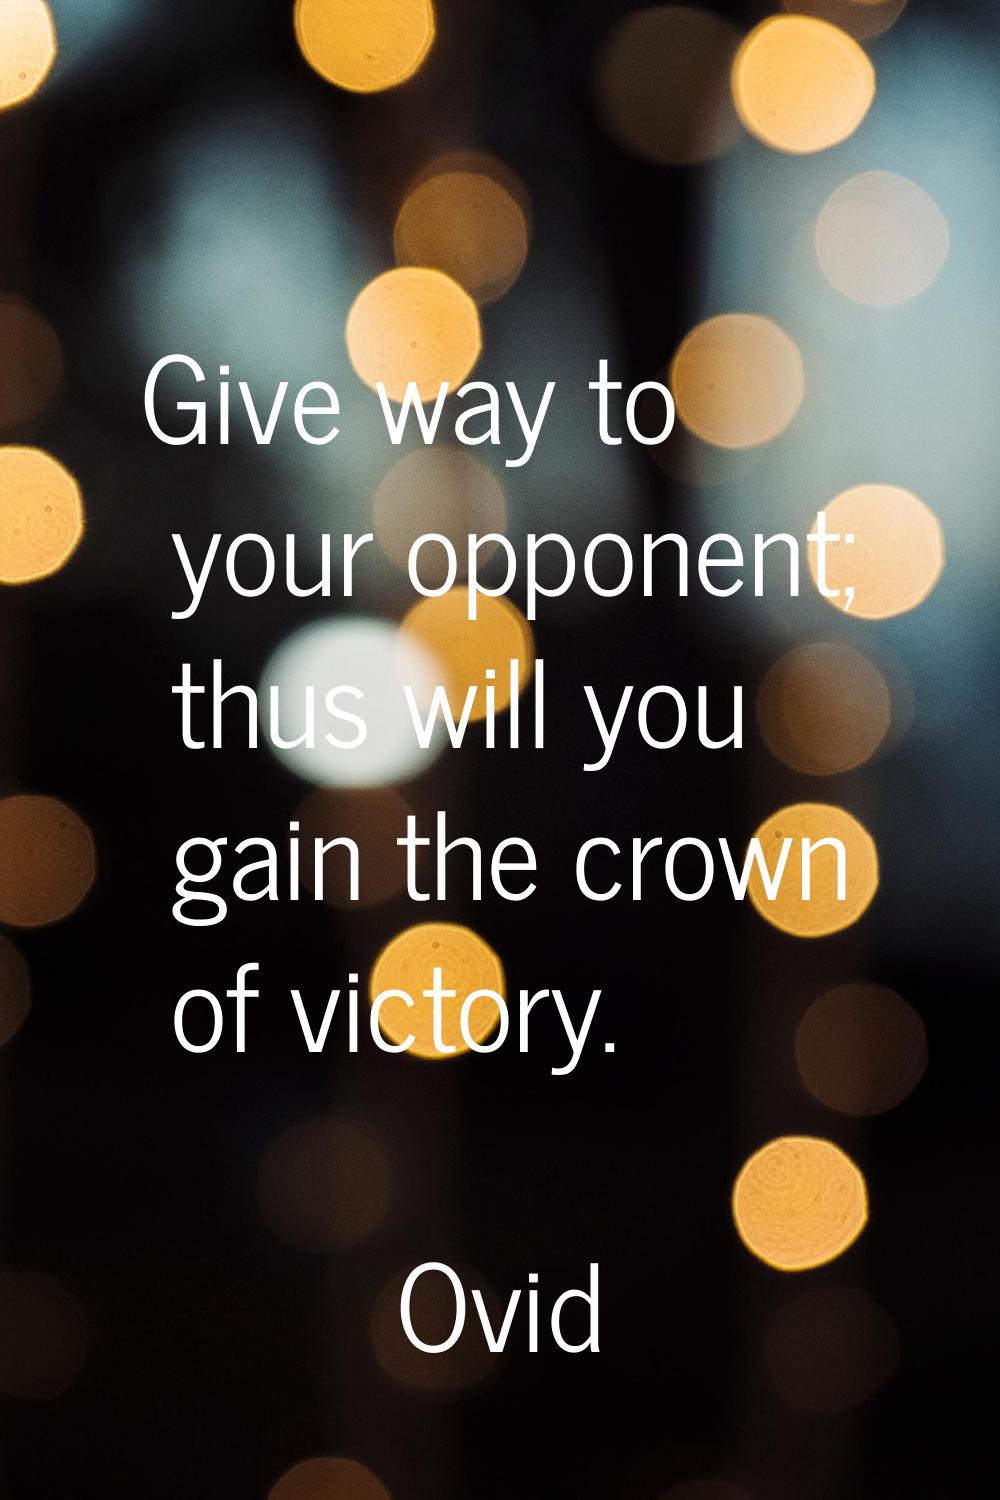 Give way to your opponent; thus will you gain the crown of victory.